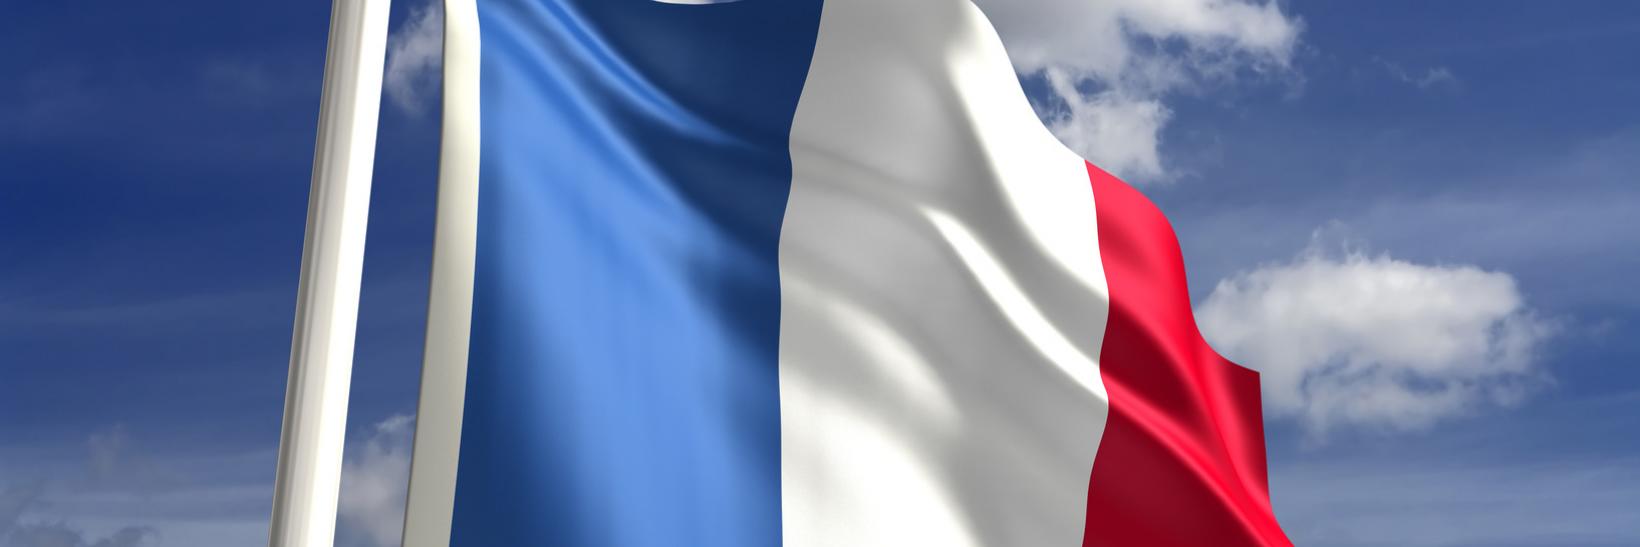 Learn more about French students in the United States.